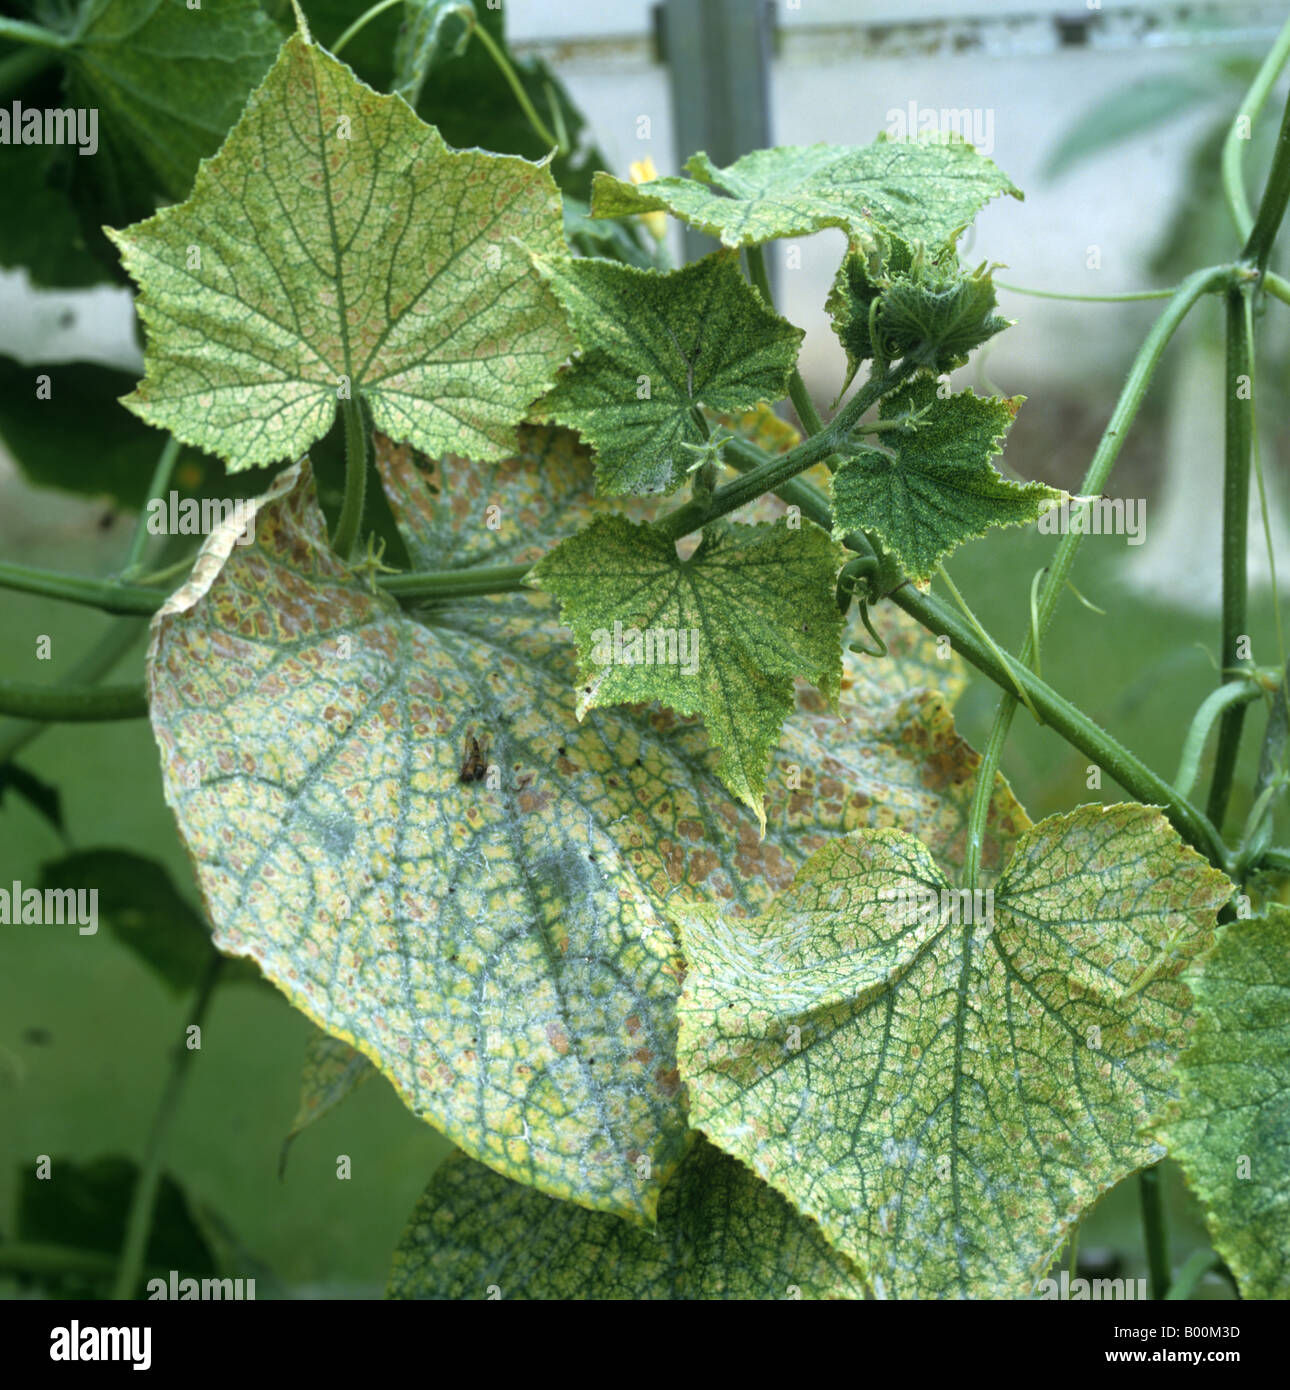 Two spotted spider mite Tetranychus urticae severe damage to glasshouse cucumber leaves Stock Photo